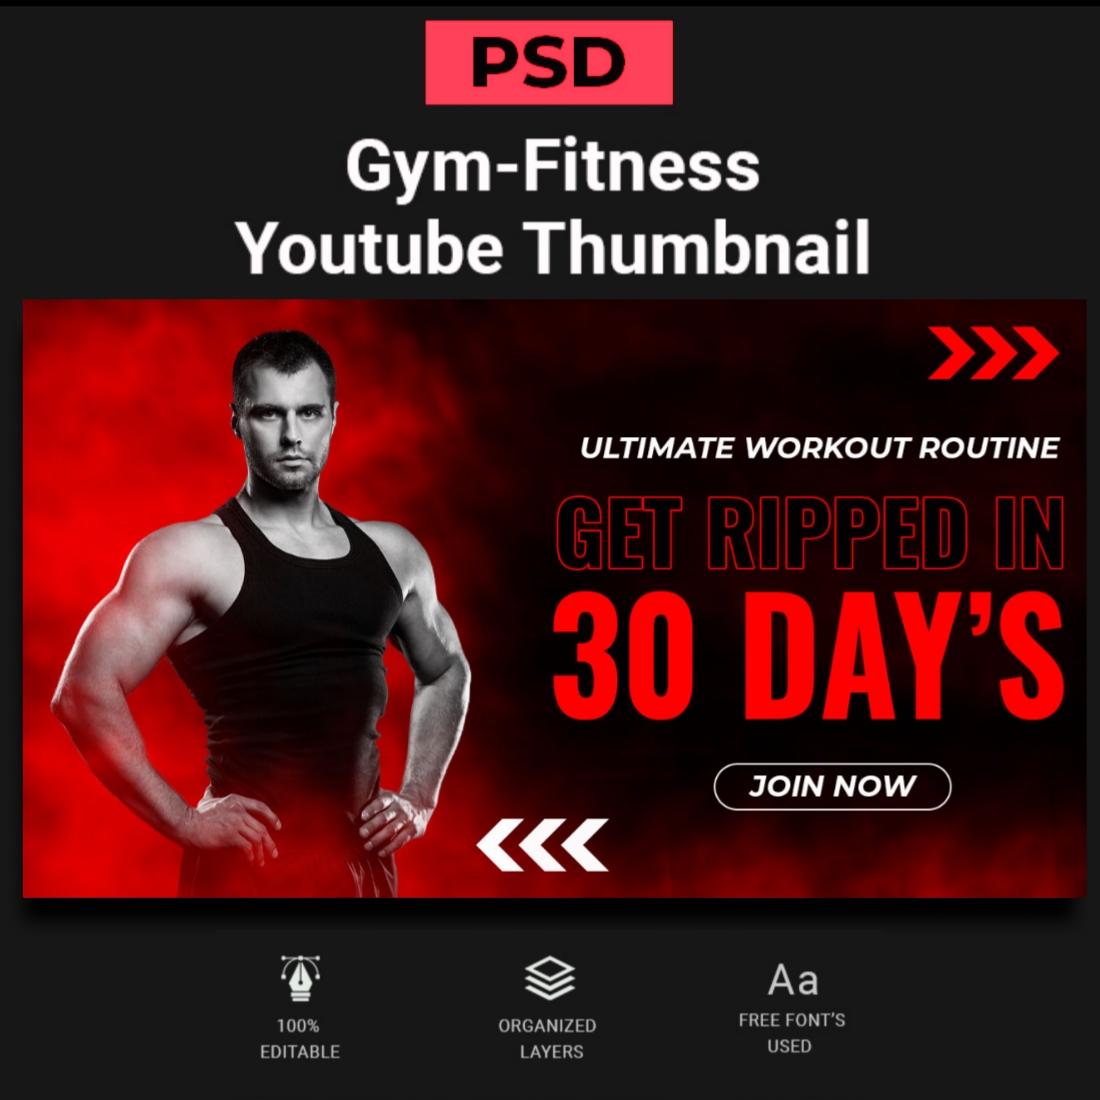 Gym-Fitness YouTube Thumbnail preview image.